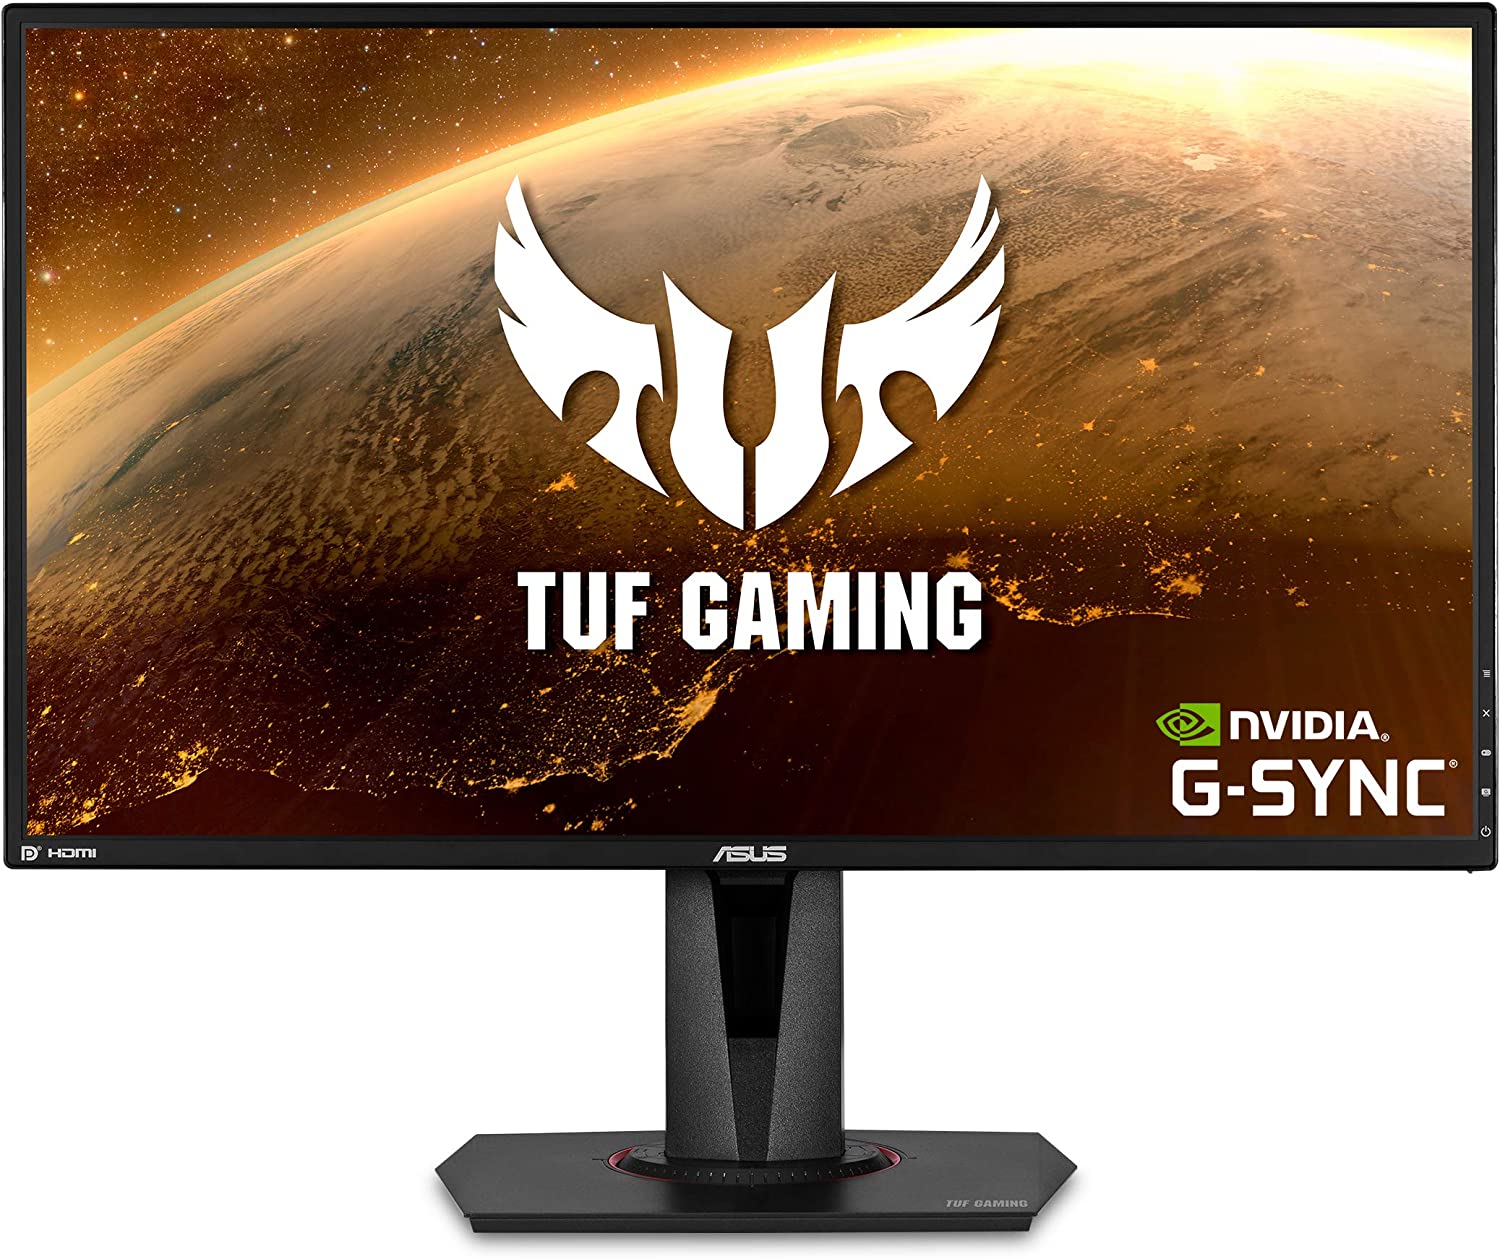 ASUS TUF Gaming 27 2K HDR Gaming Monitor (VG27AQ) - QHD (2560 x 1440), 165Hz (Supports 144Hz), 1ms, Extreme Low Motion Blur, Speaker, G-SYNC Compatible